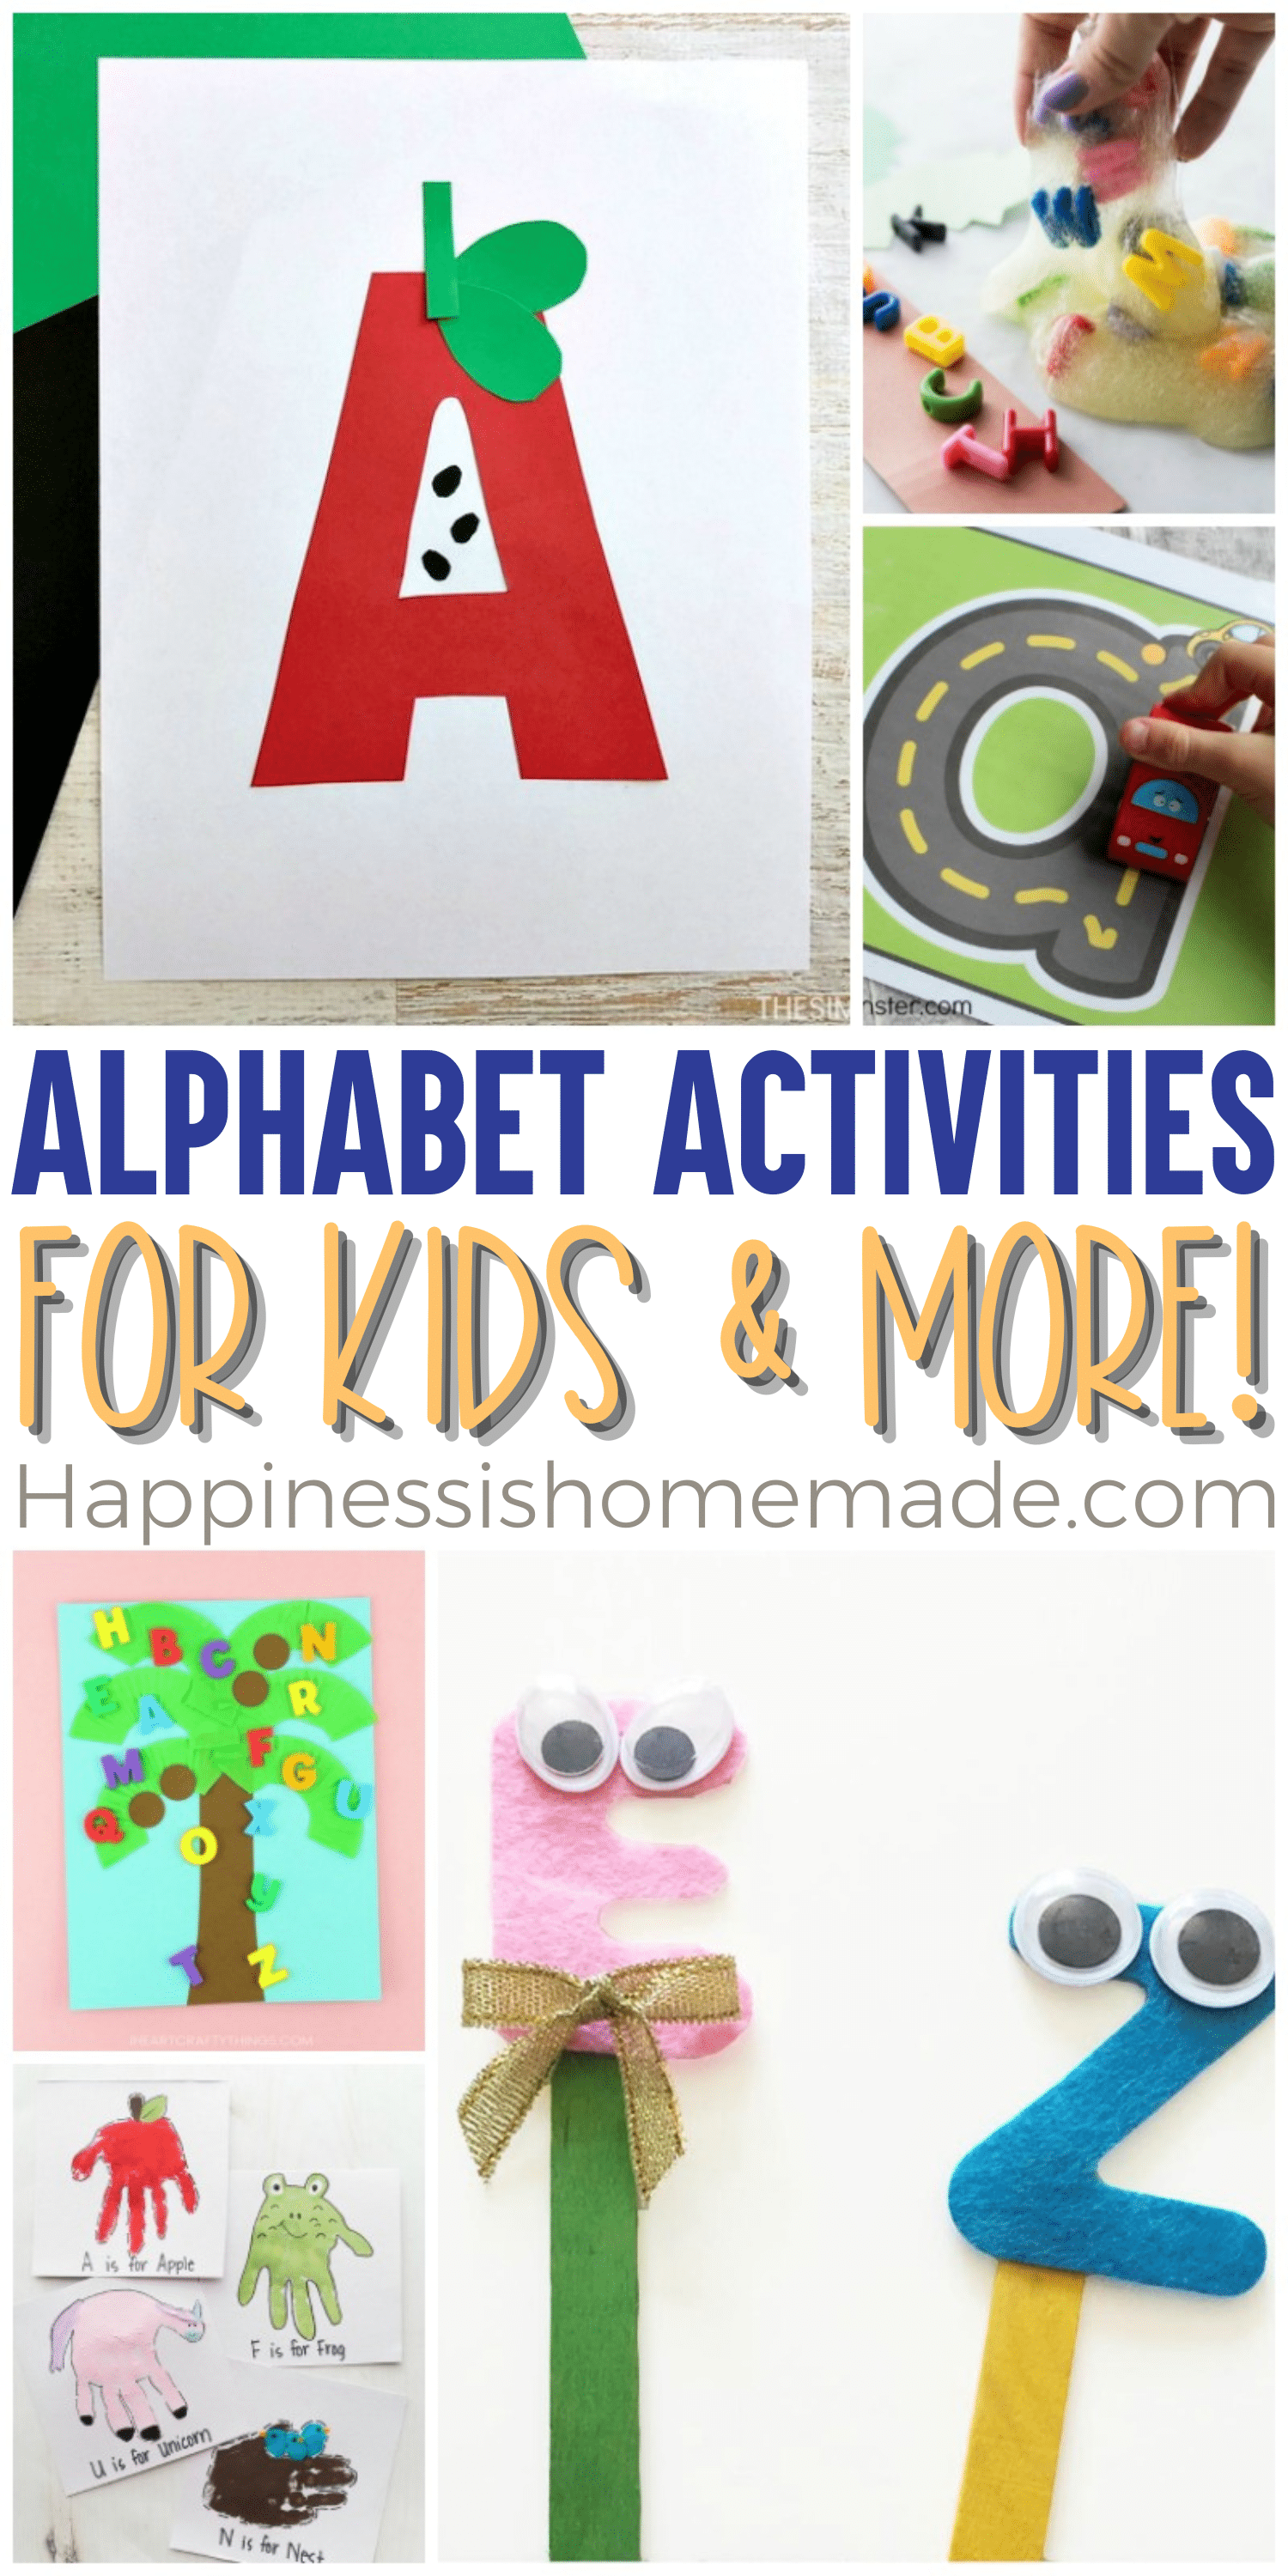 'Alphabet activities for kids & more' pin graphic